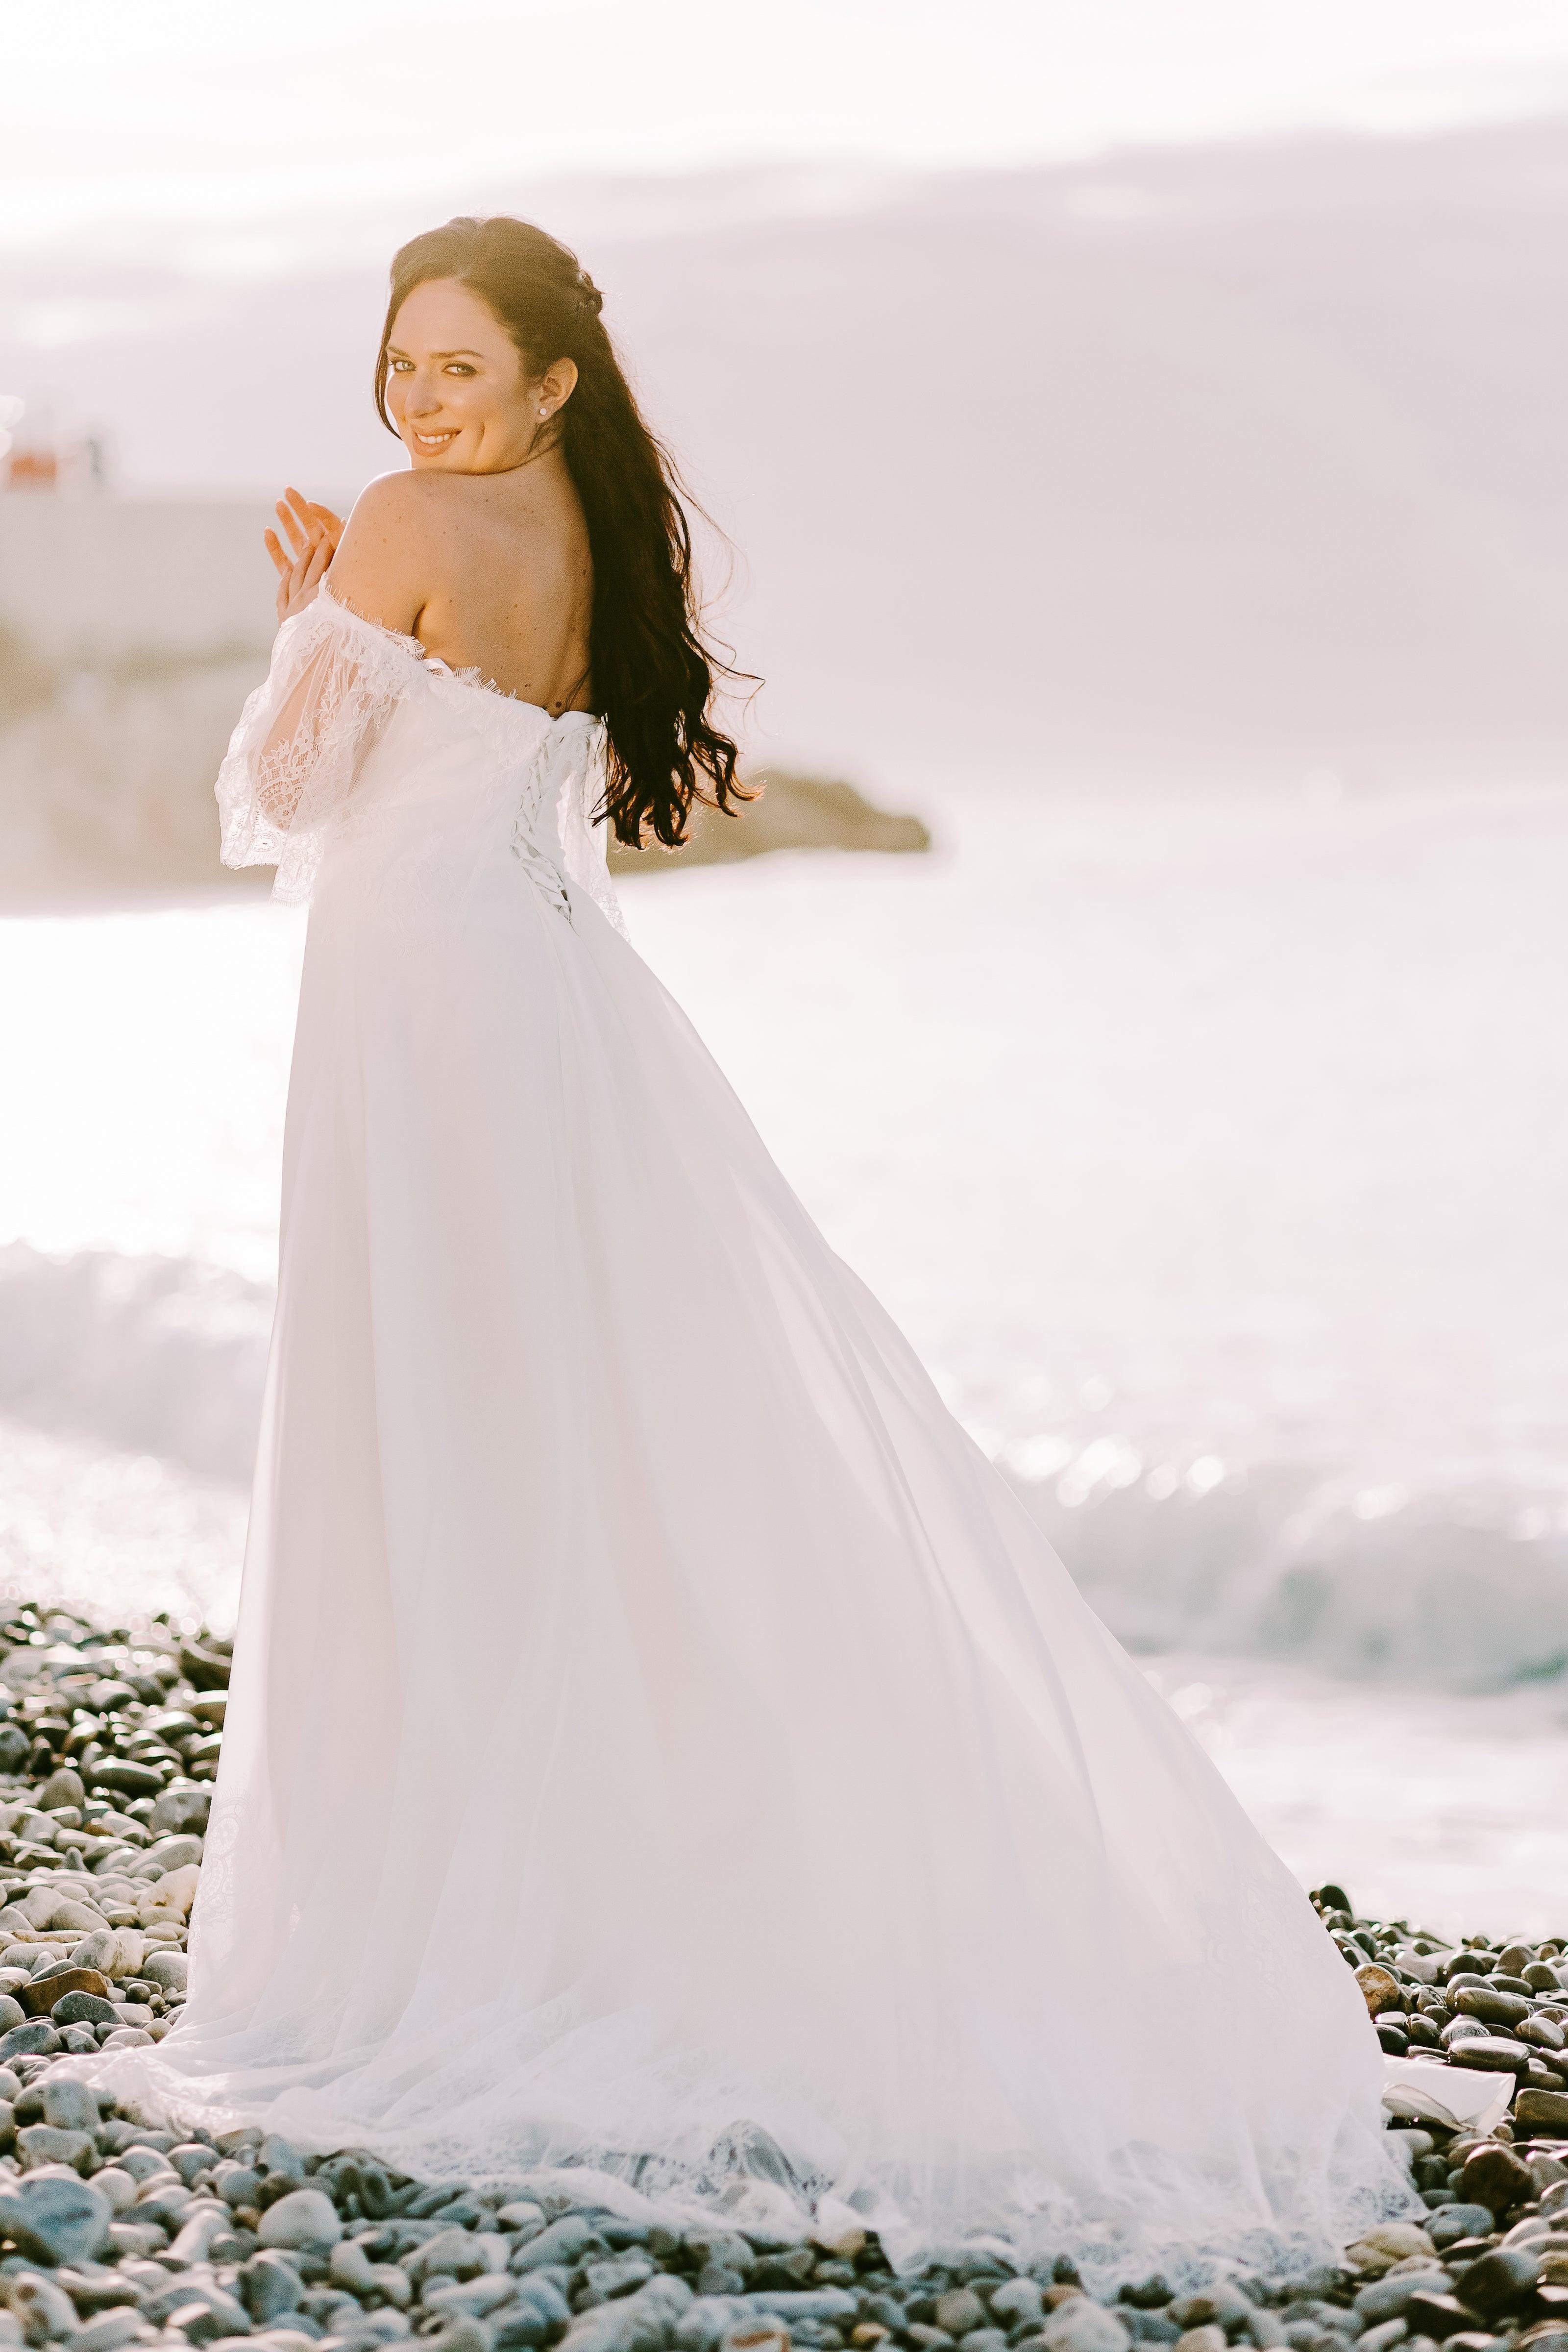 Off the Shoulder Gown | Beach Wedding Dress | Dare and Dazzle